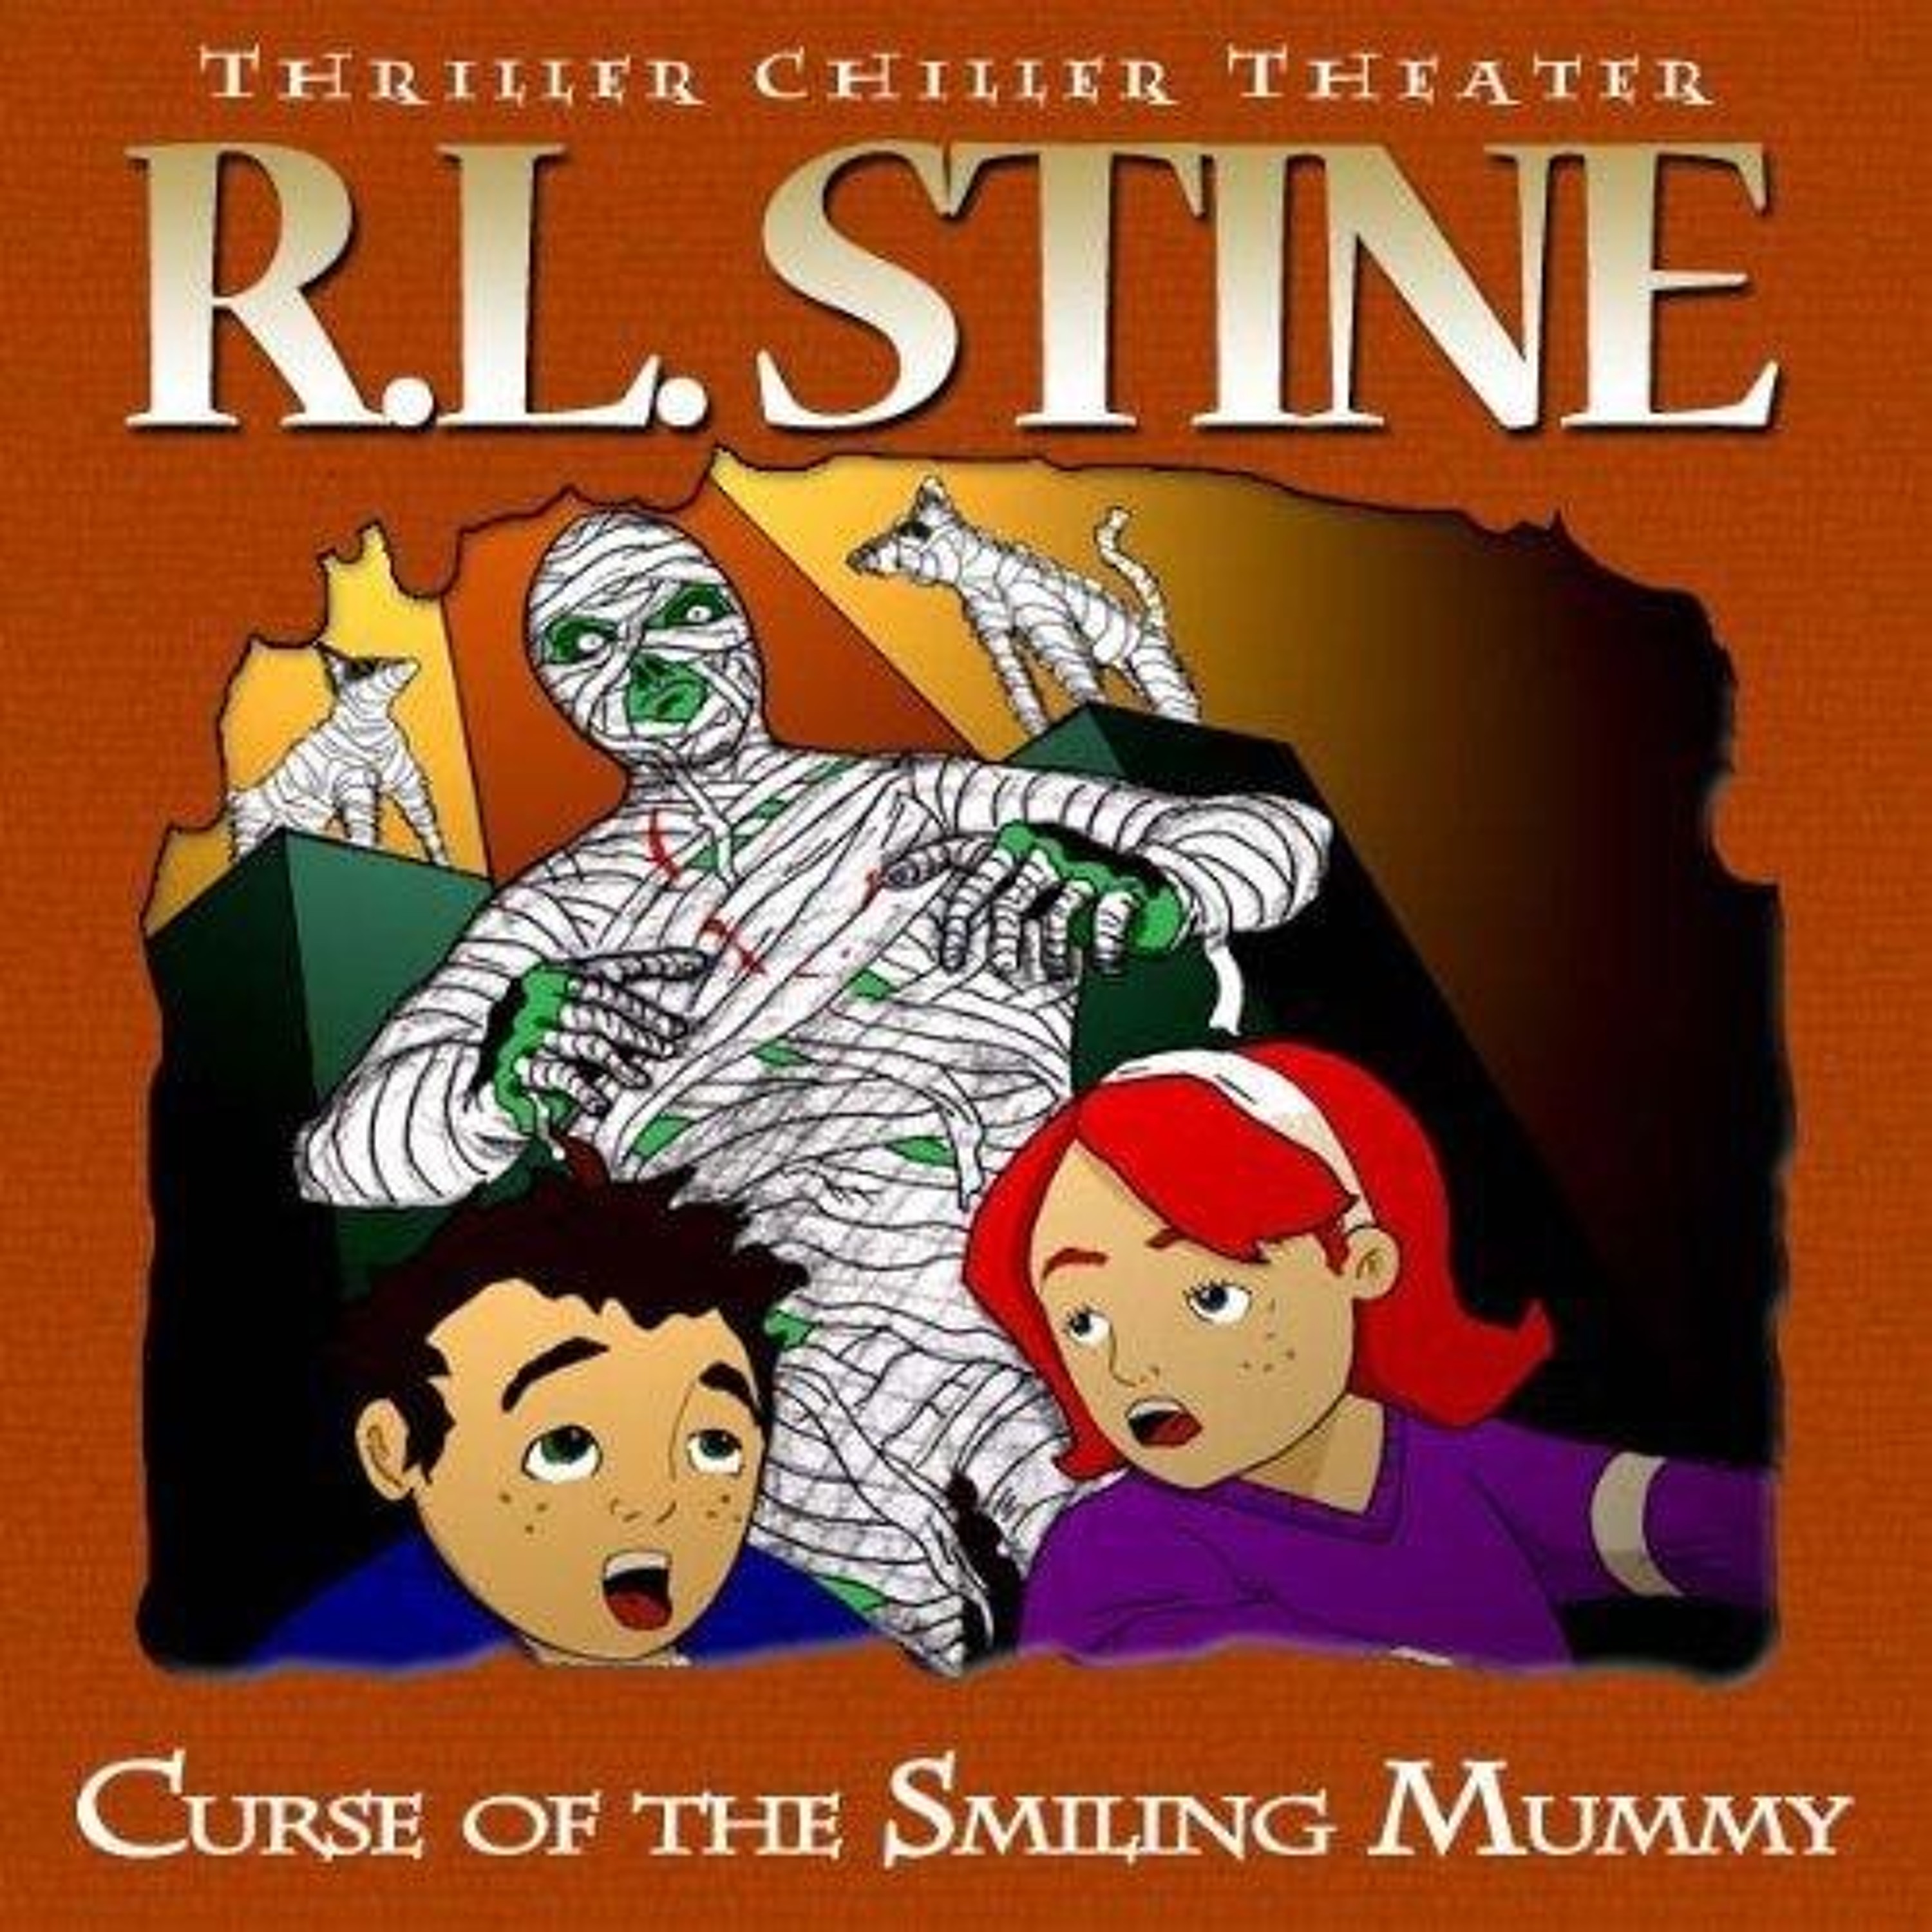 Curse of the Smiling Mummy